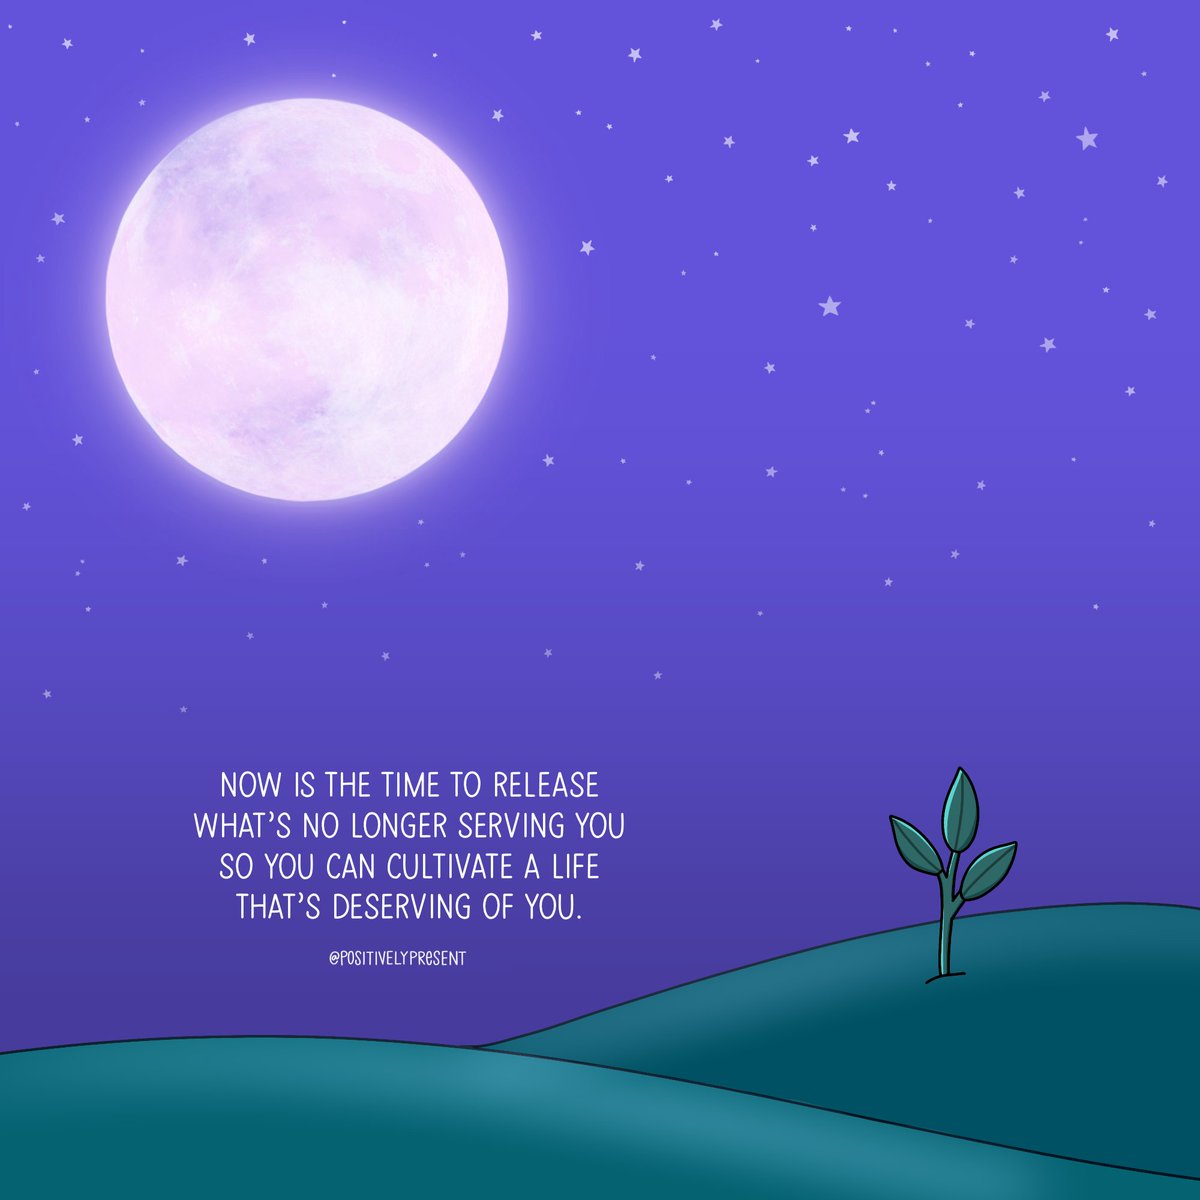 Today’s the pink full moon. Time to release what’s no longer serving you!